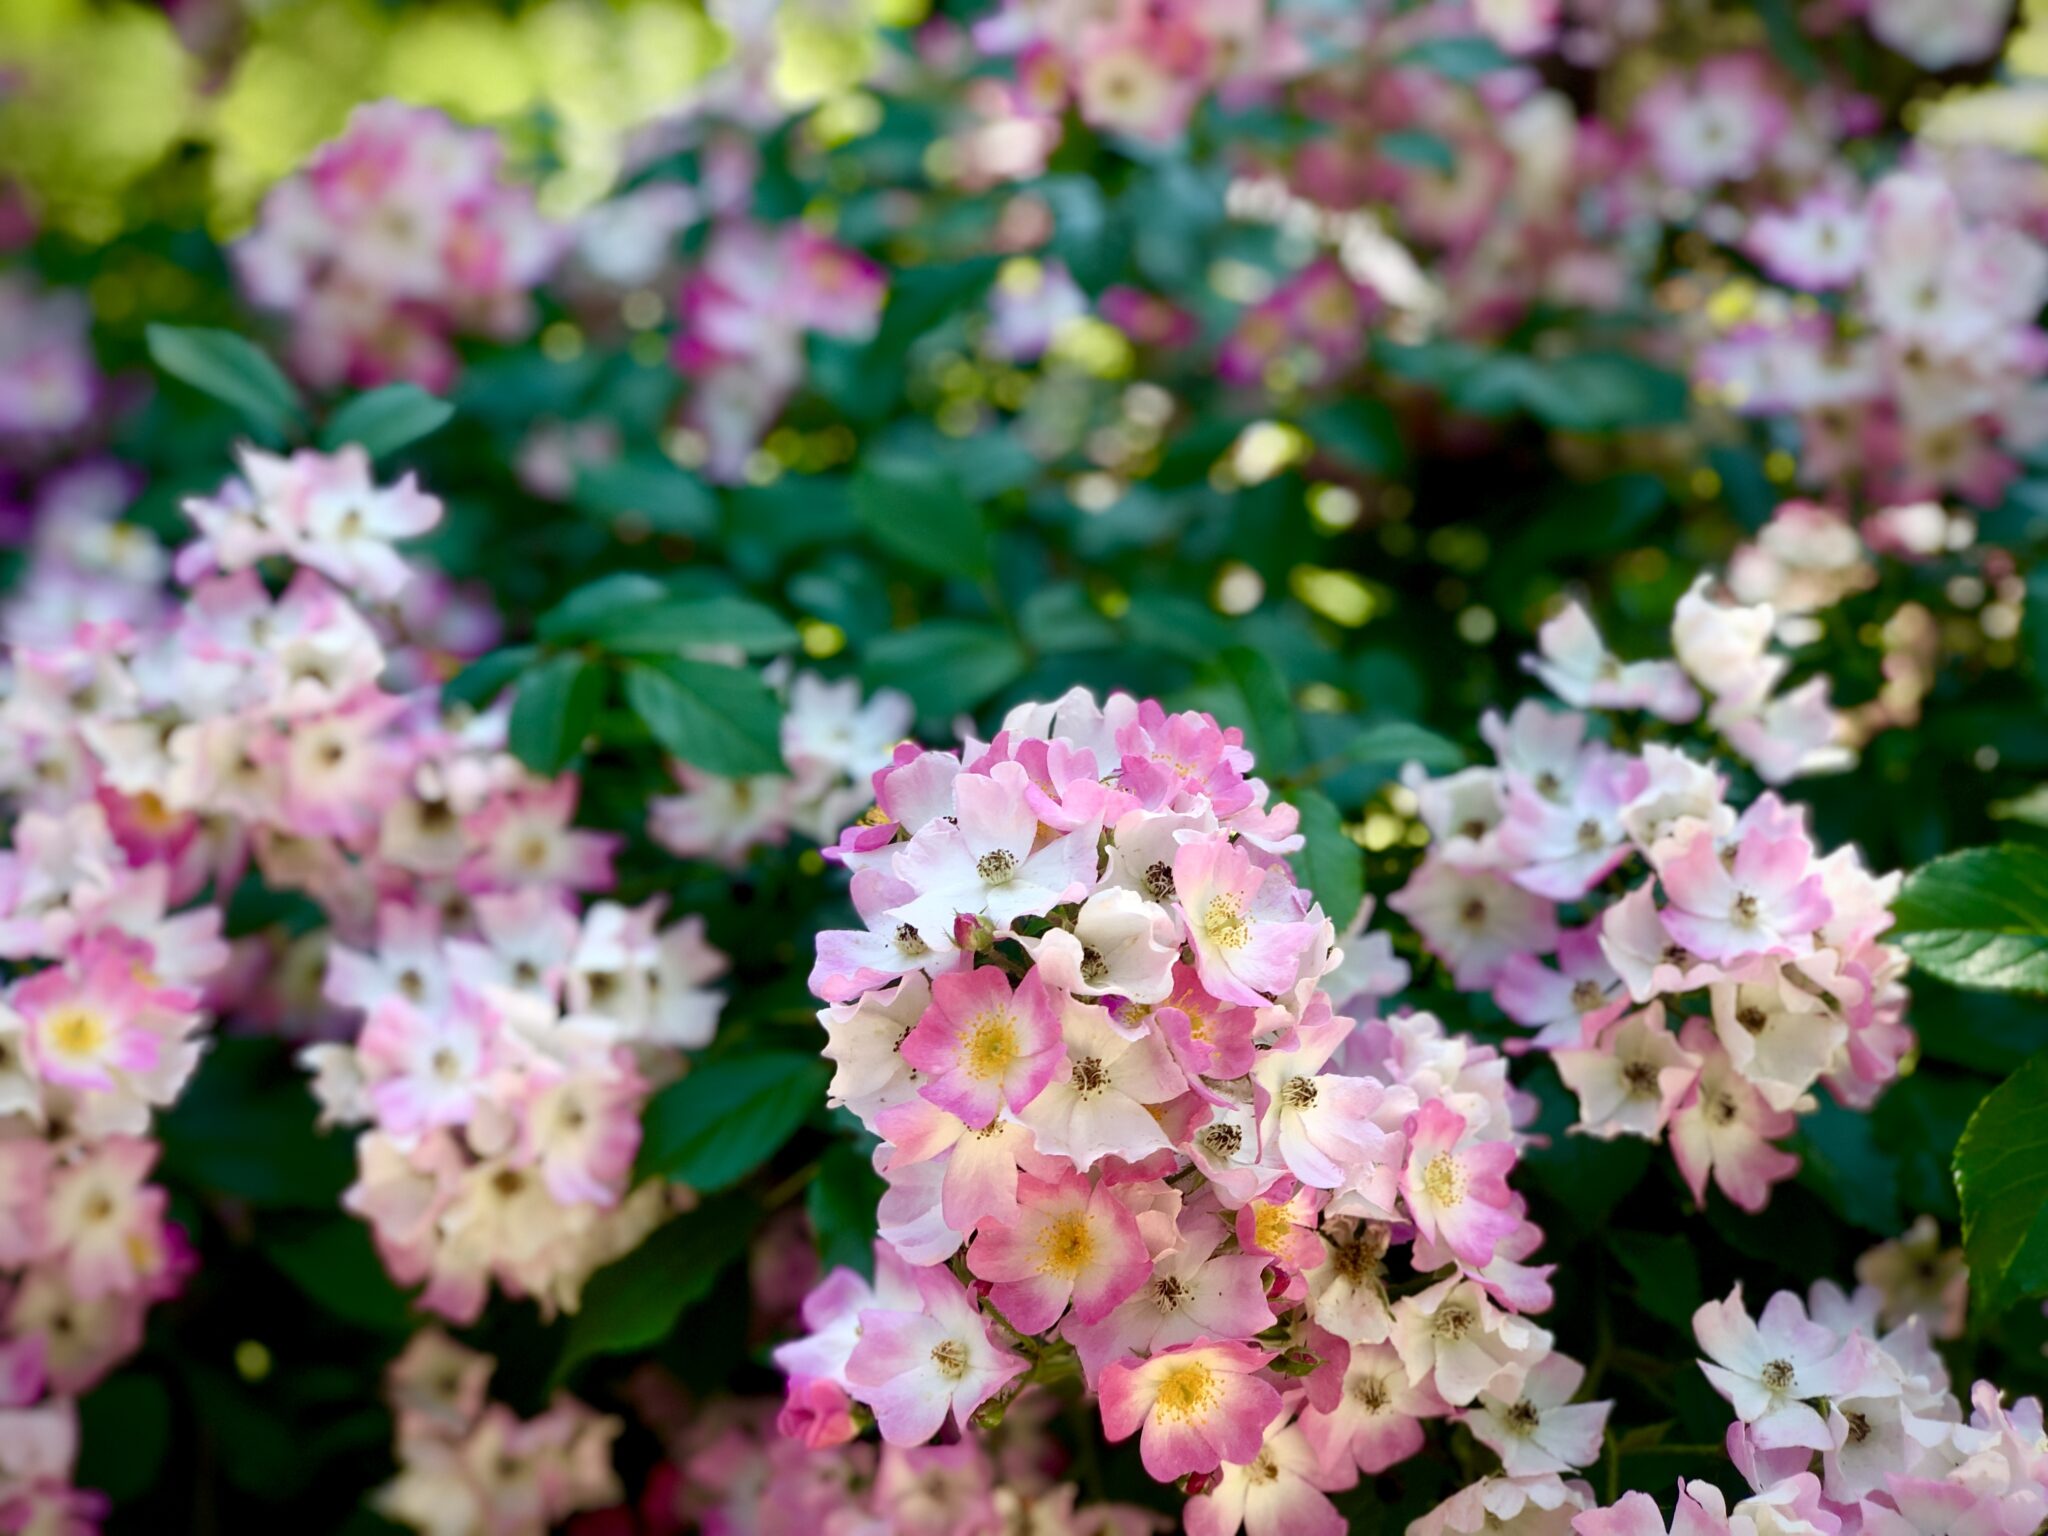 bunches of small, pink flowers